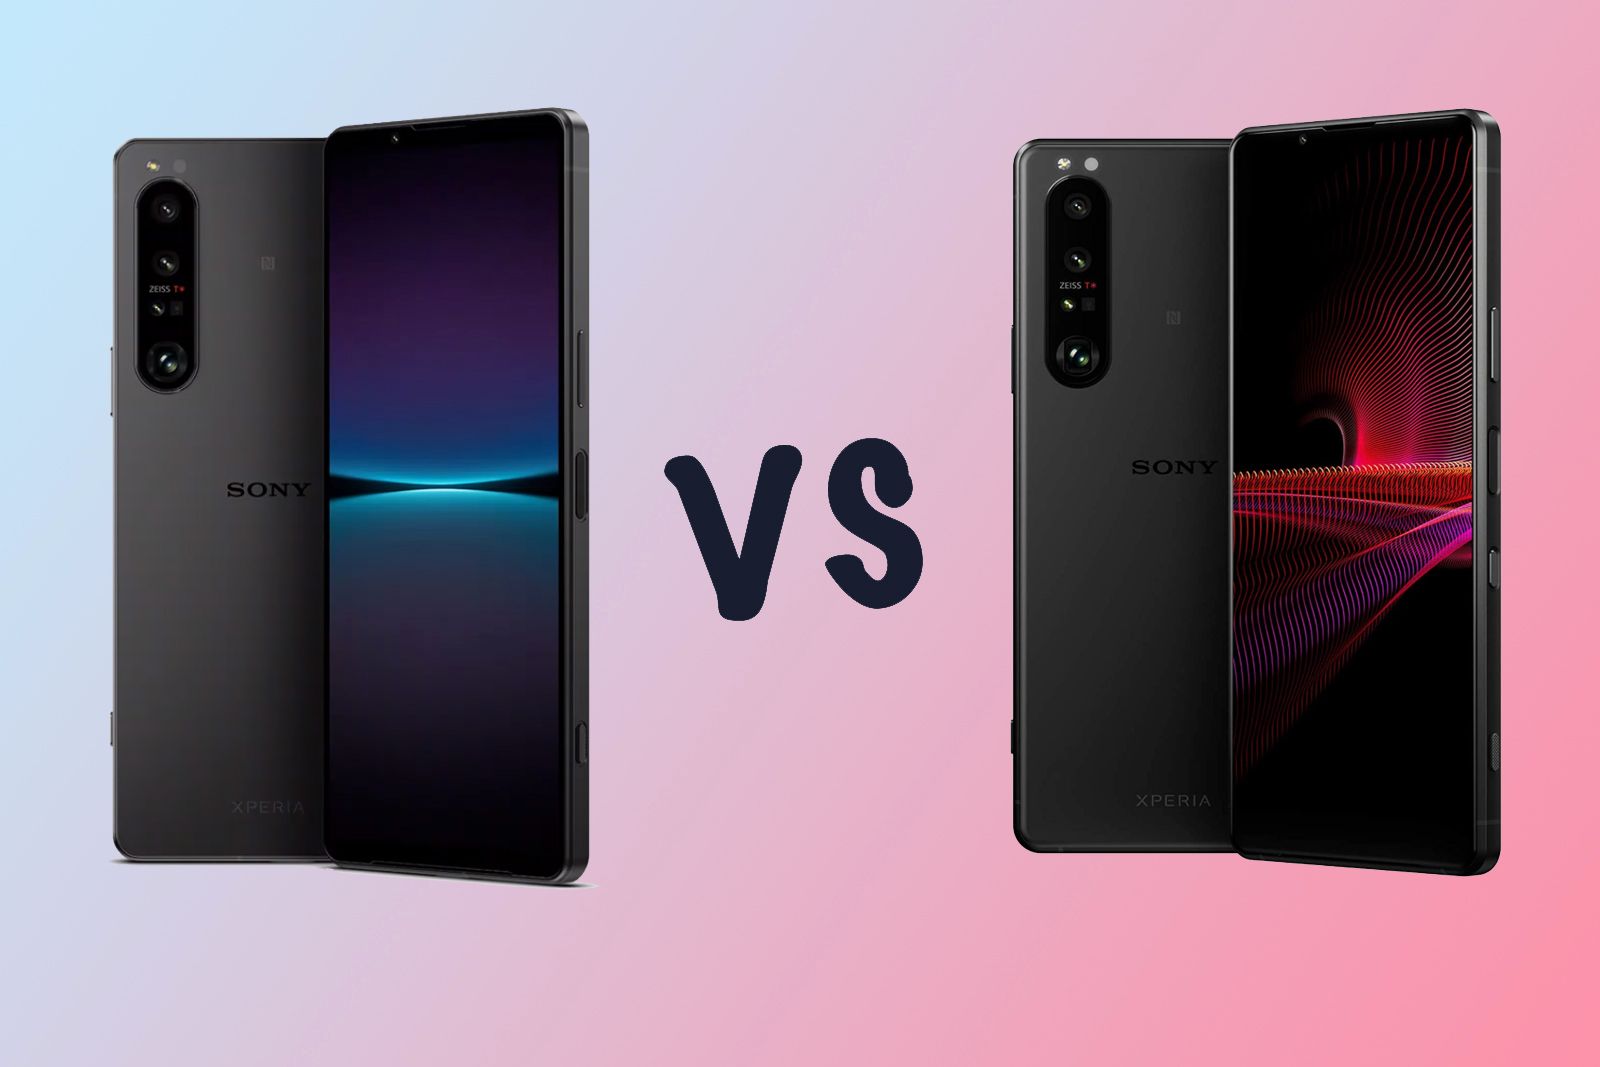 Sony Xperia 1 IV vs Xperia 1 III: What's the difference? photo 1